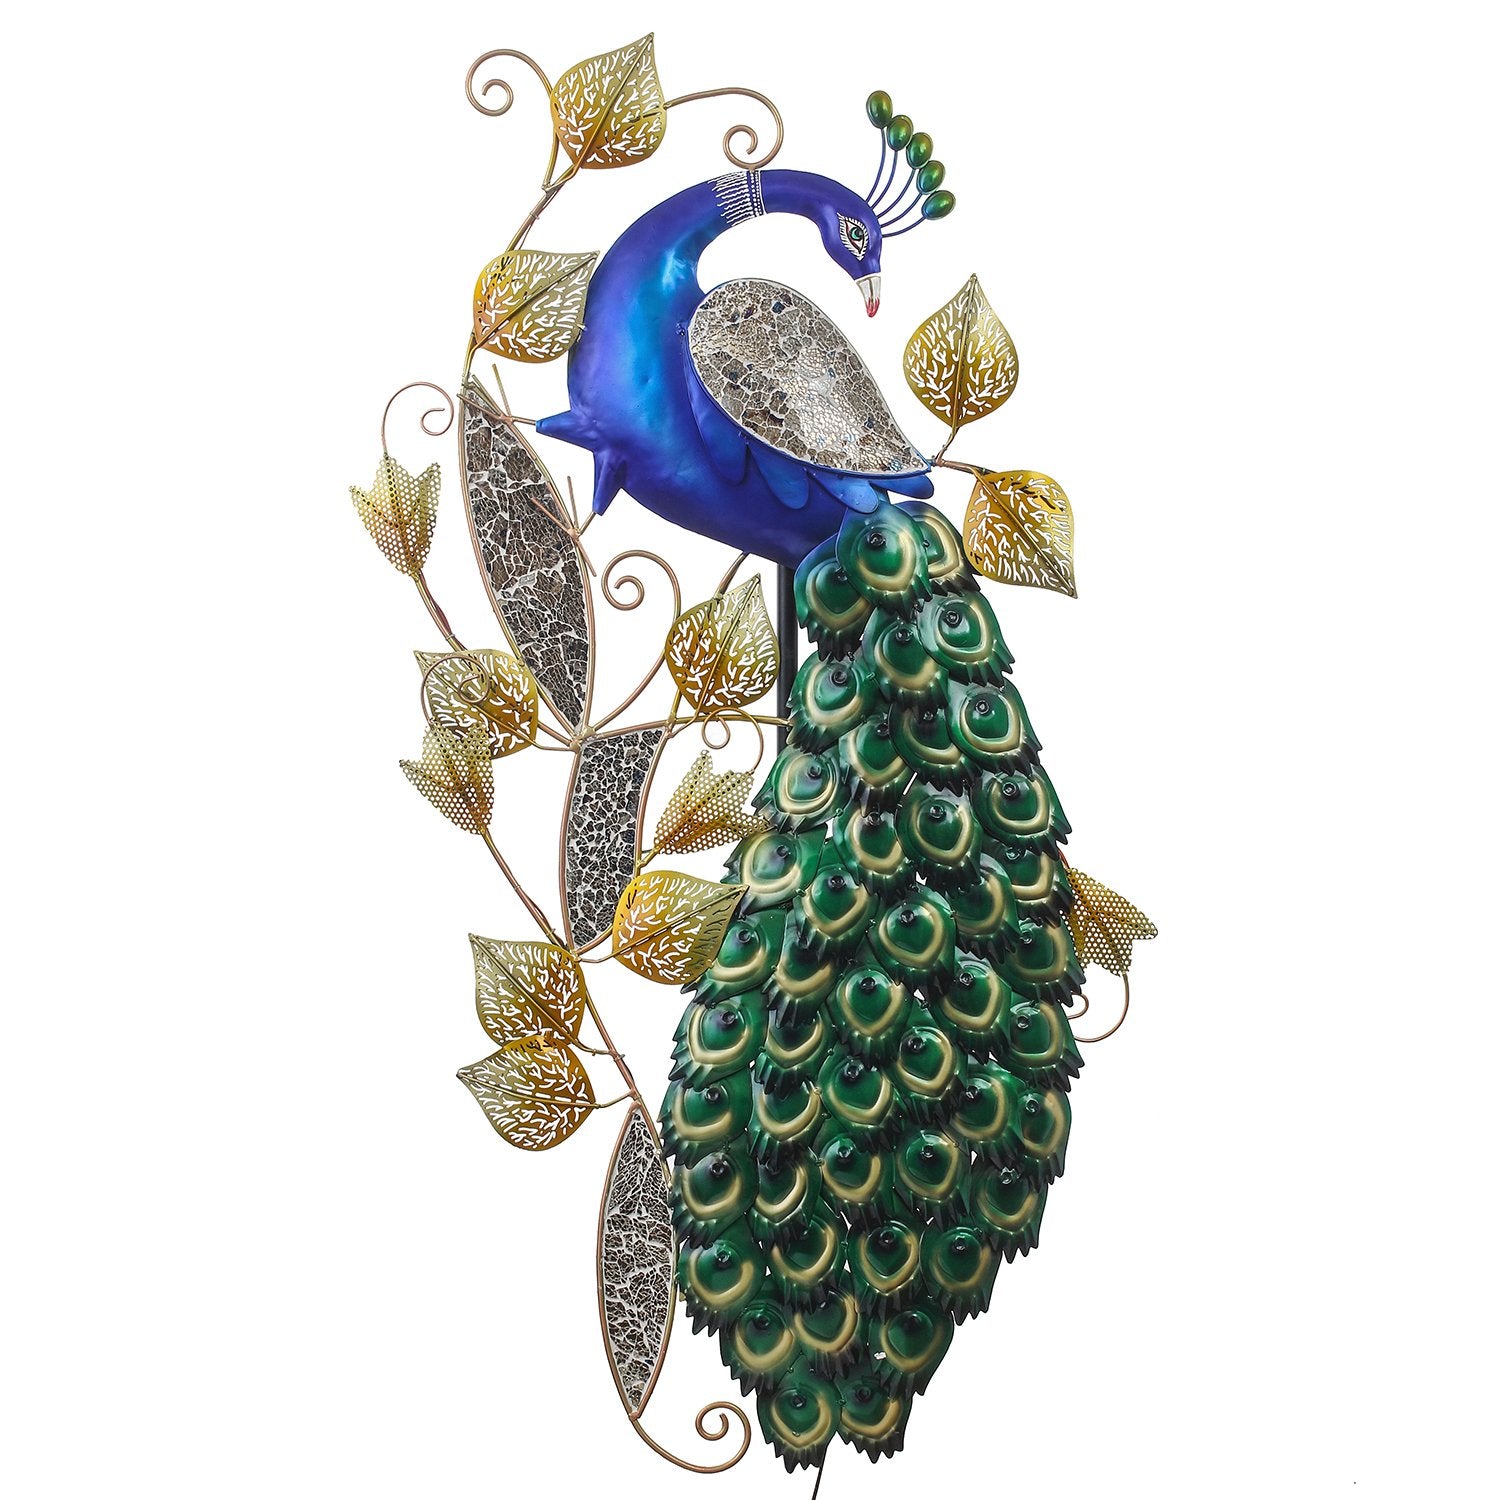 Decorative Colorful Peacock Handcrafted Iron Wall Hanging with background LED's (Blue, Green and Golden) 1